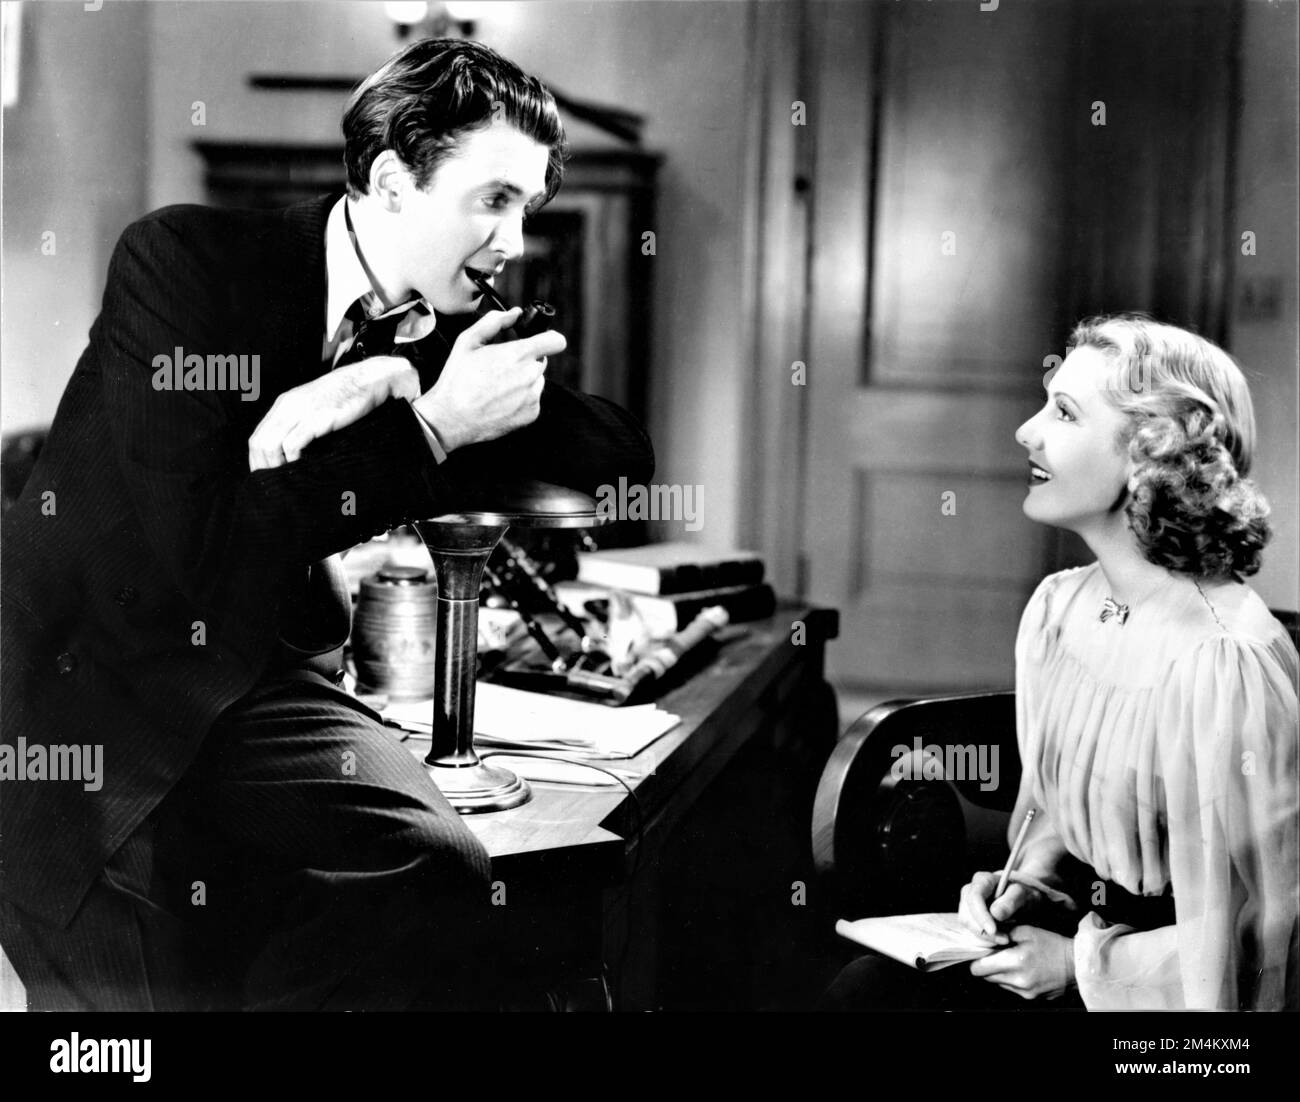 JAMES STEWART and JEAN ARTHUR in MR. SMITH GOES TO WASHINGTON 1939 director FRANK CAPRA story Lewis R. Foster screenplay Sidney Buchman music Dimitri Tiomkin Columbia Pictures Stock Photo